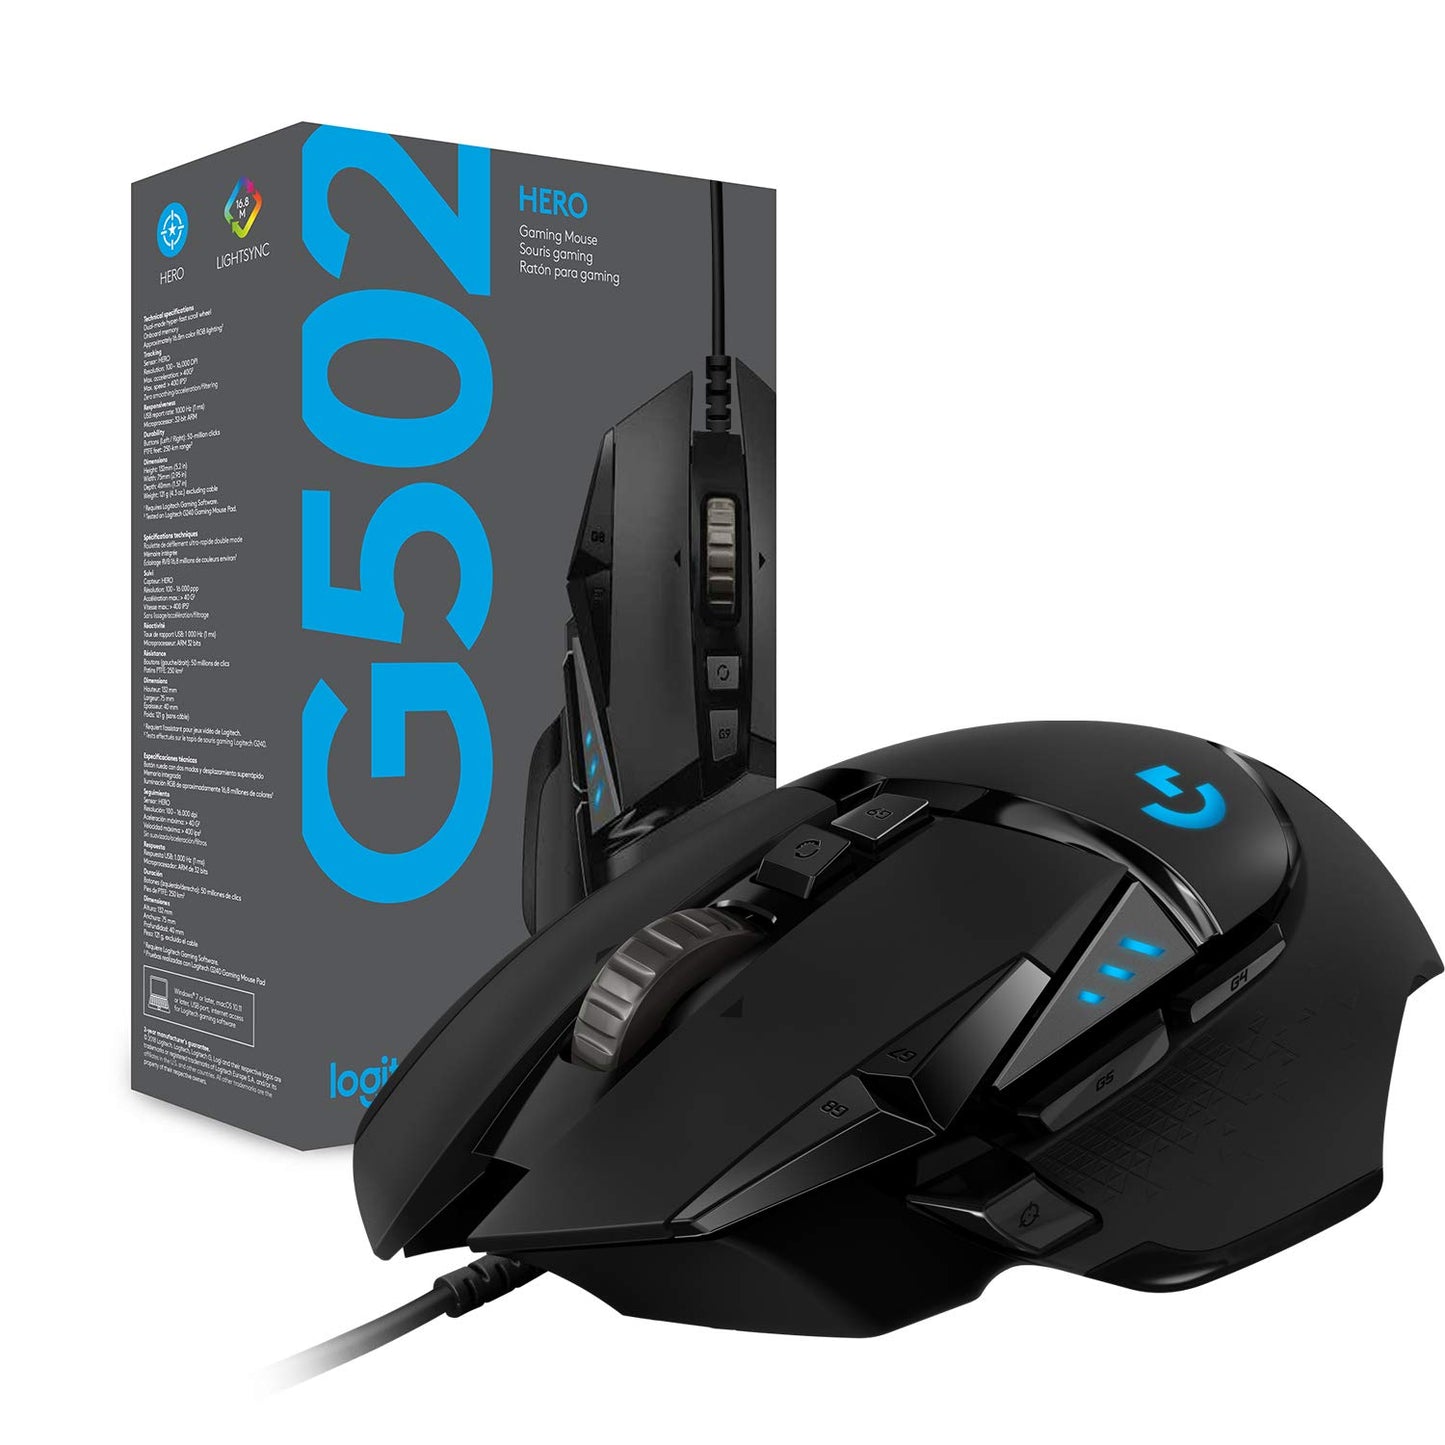 Logitech G502 HERO High Performance Wired Gaming Mouse, HERO 25K Sensor, 25,600 DPI, RGB, Adjustable Weights, 11 Programmable Buttons, On-Board Memory, PC/Mac, Black